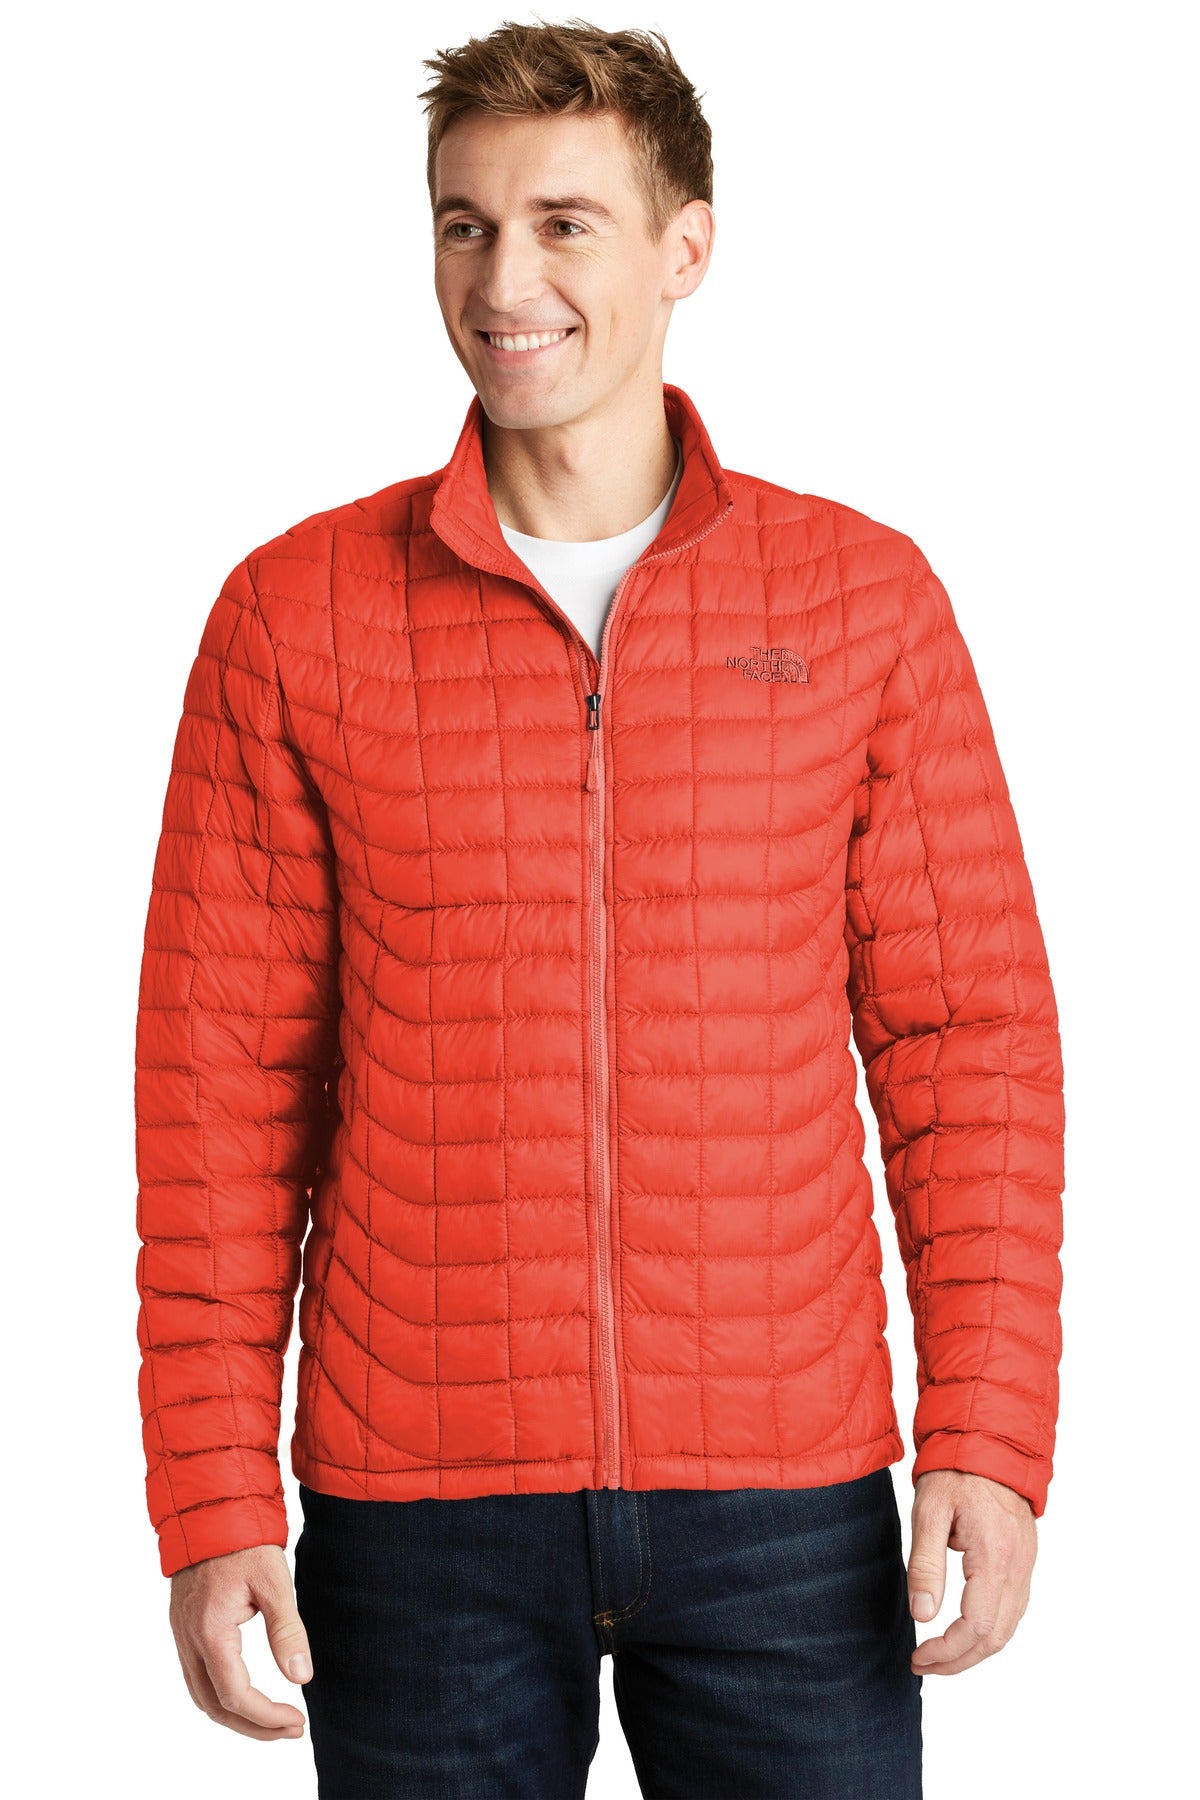 Outerwear Fire Brick Red The North Face